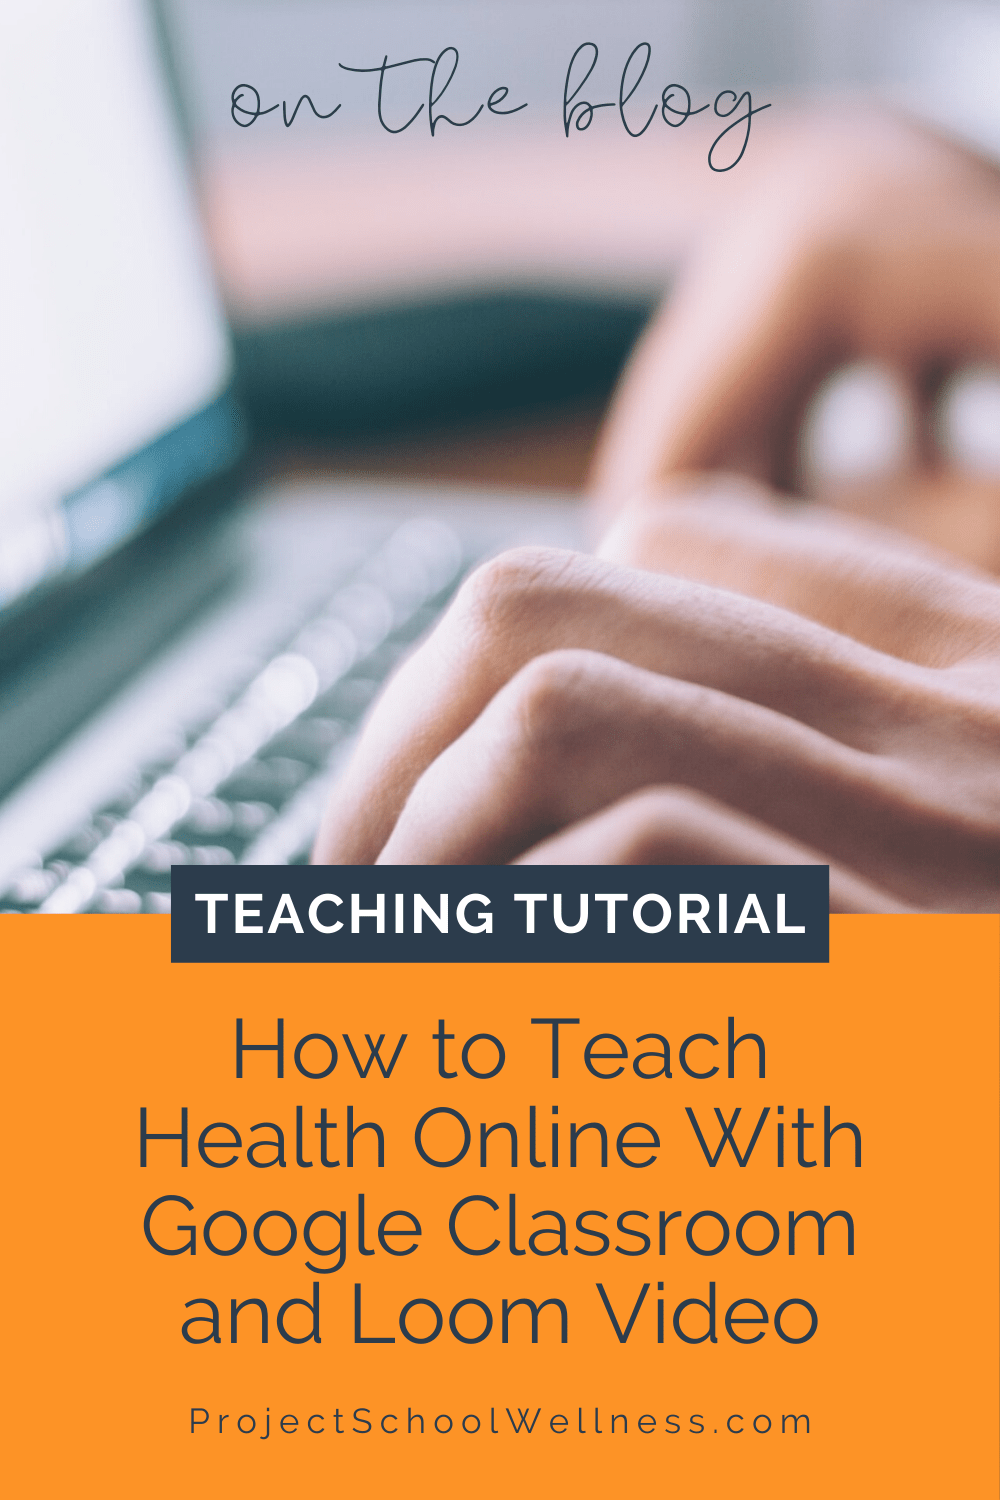 How To Teach Health Online With Google Classroom And Loom Video